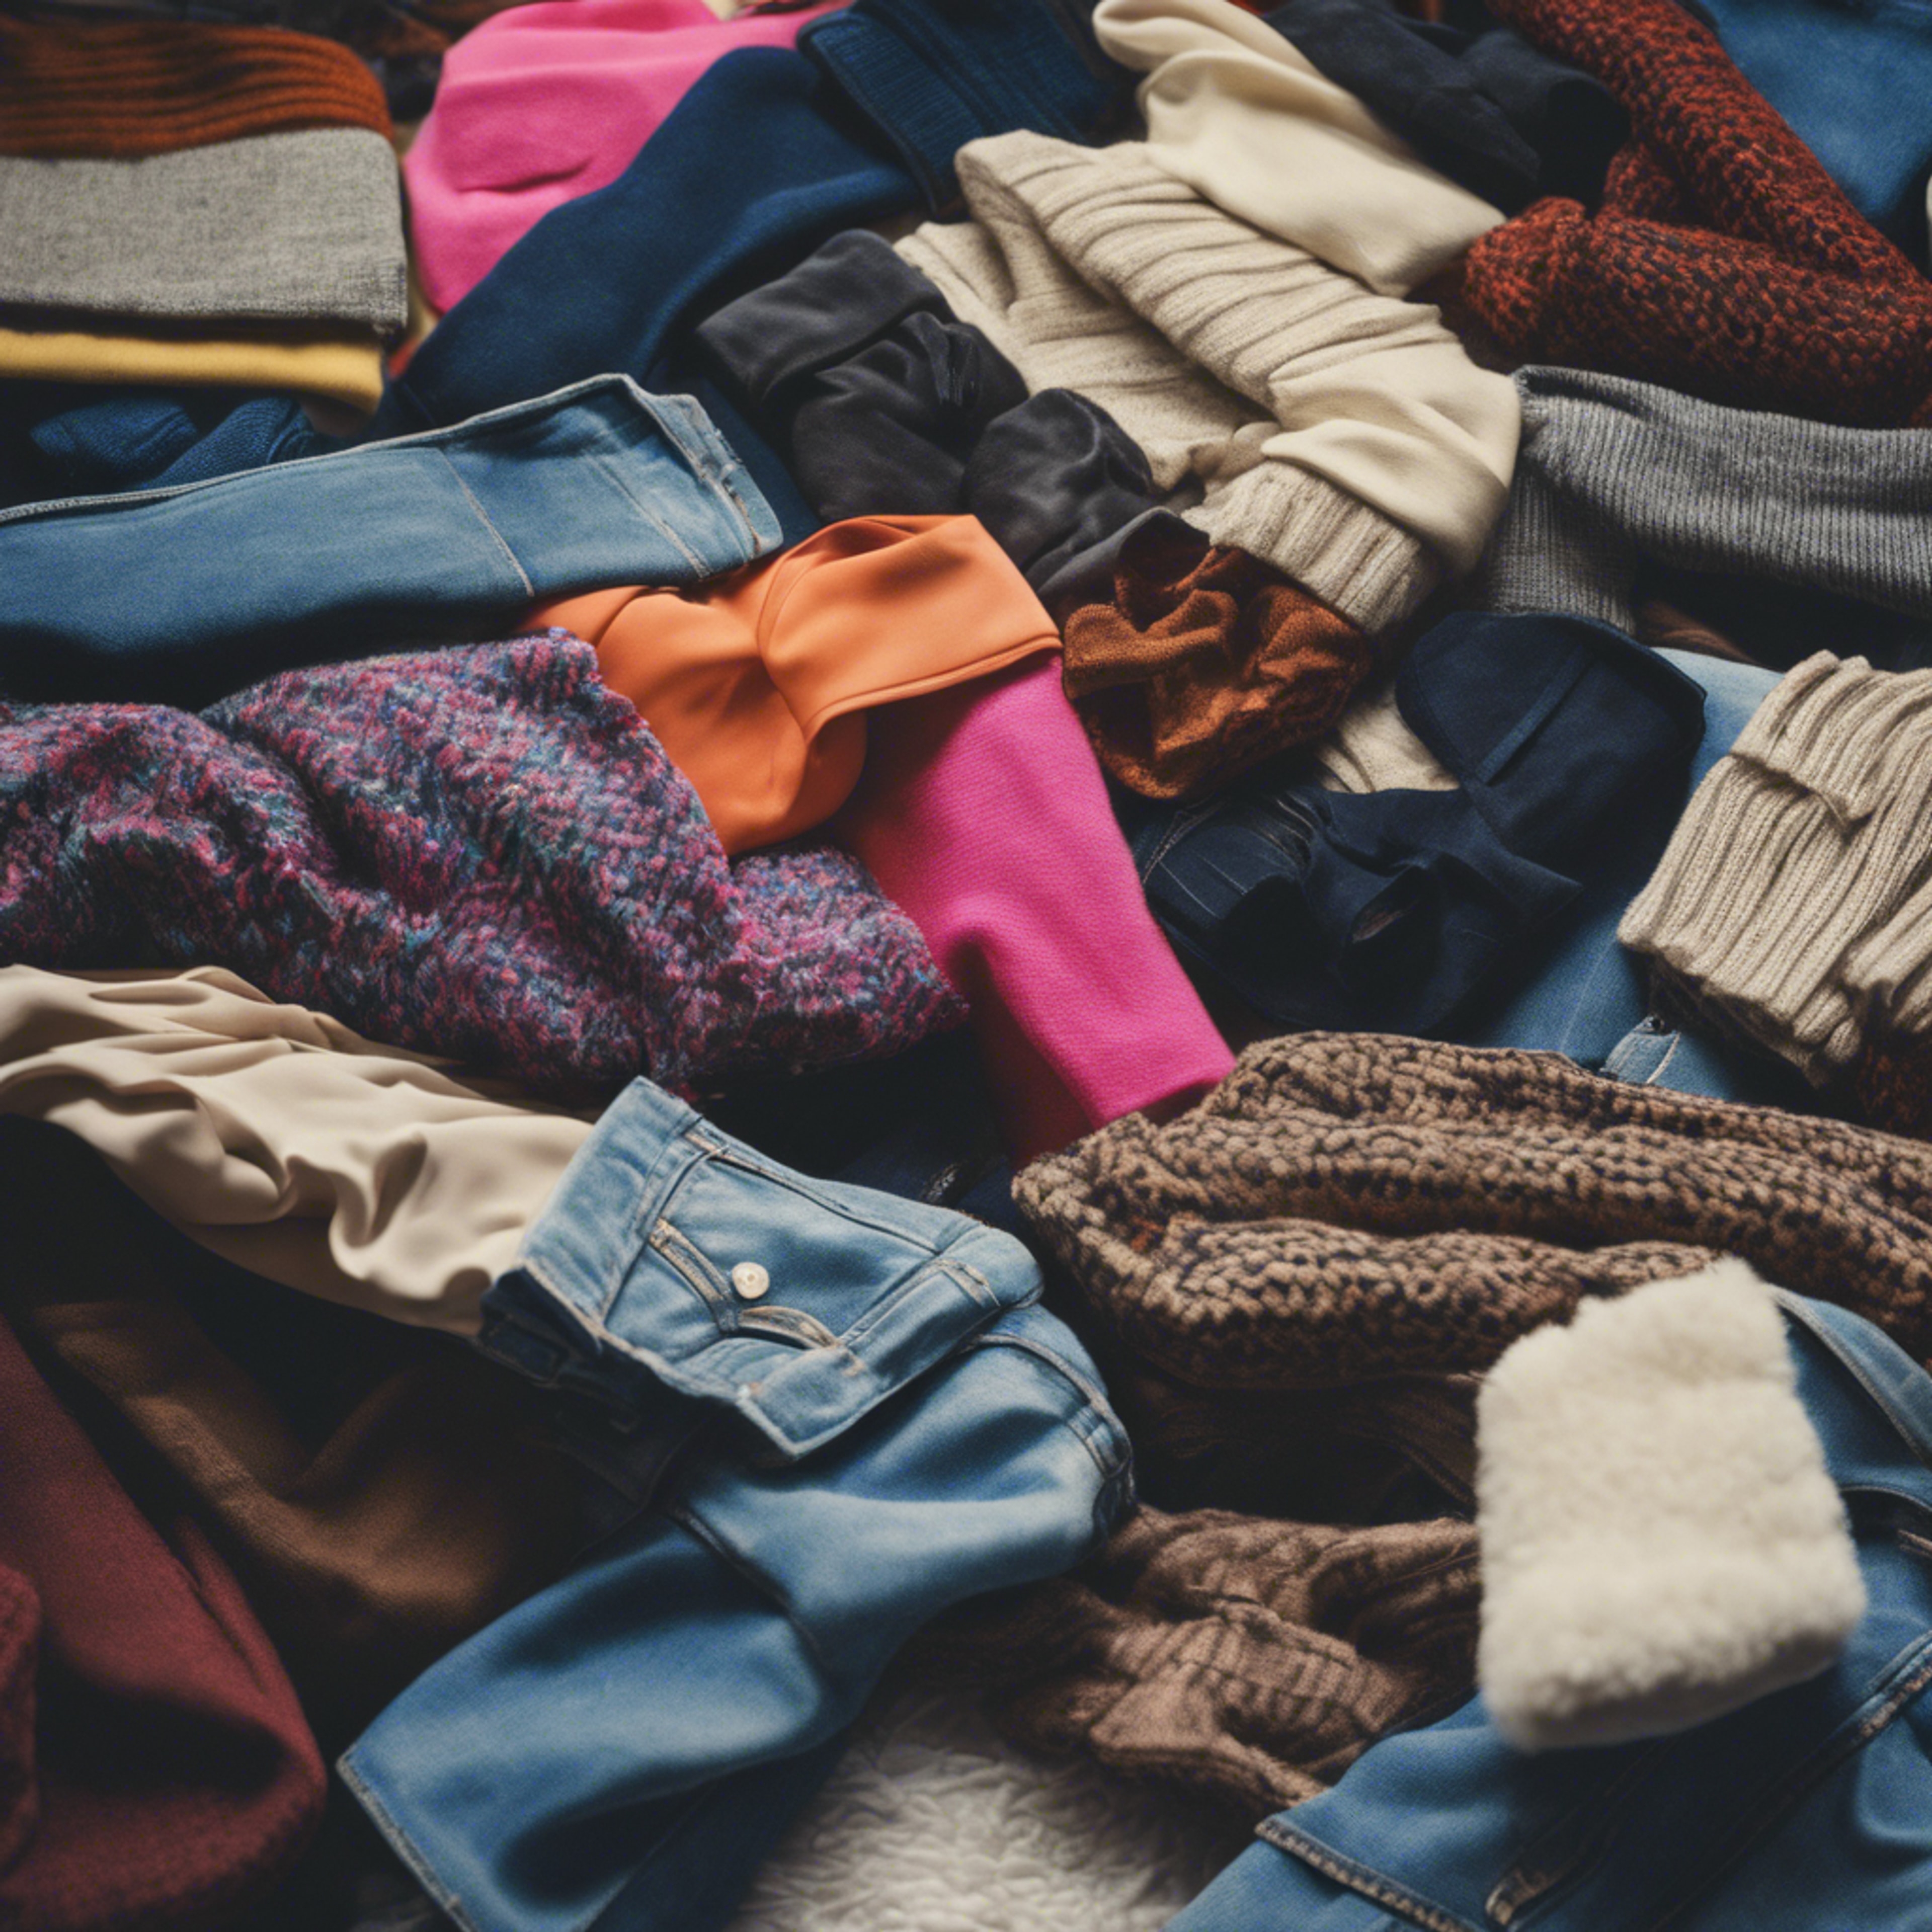 A pile of iconic 80s fashions such as leg warmers, oversized blazers, and high-waisted jeans. Wallpaper[dbd69f645b7844d6a4c4]